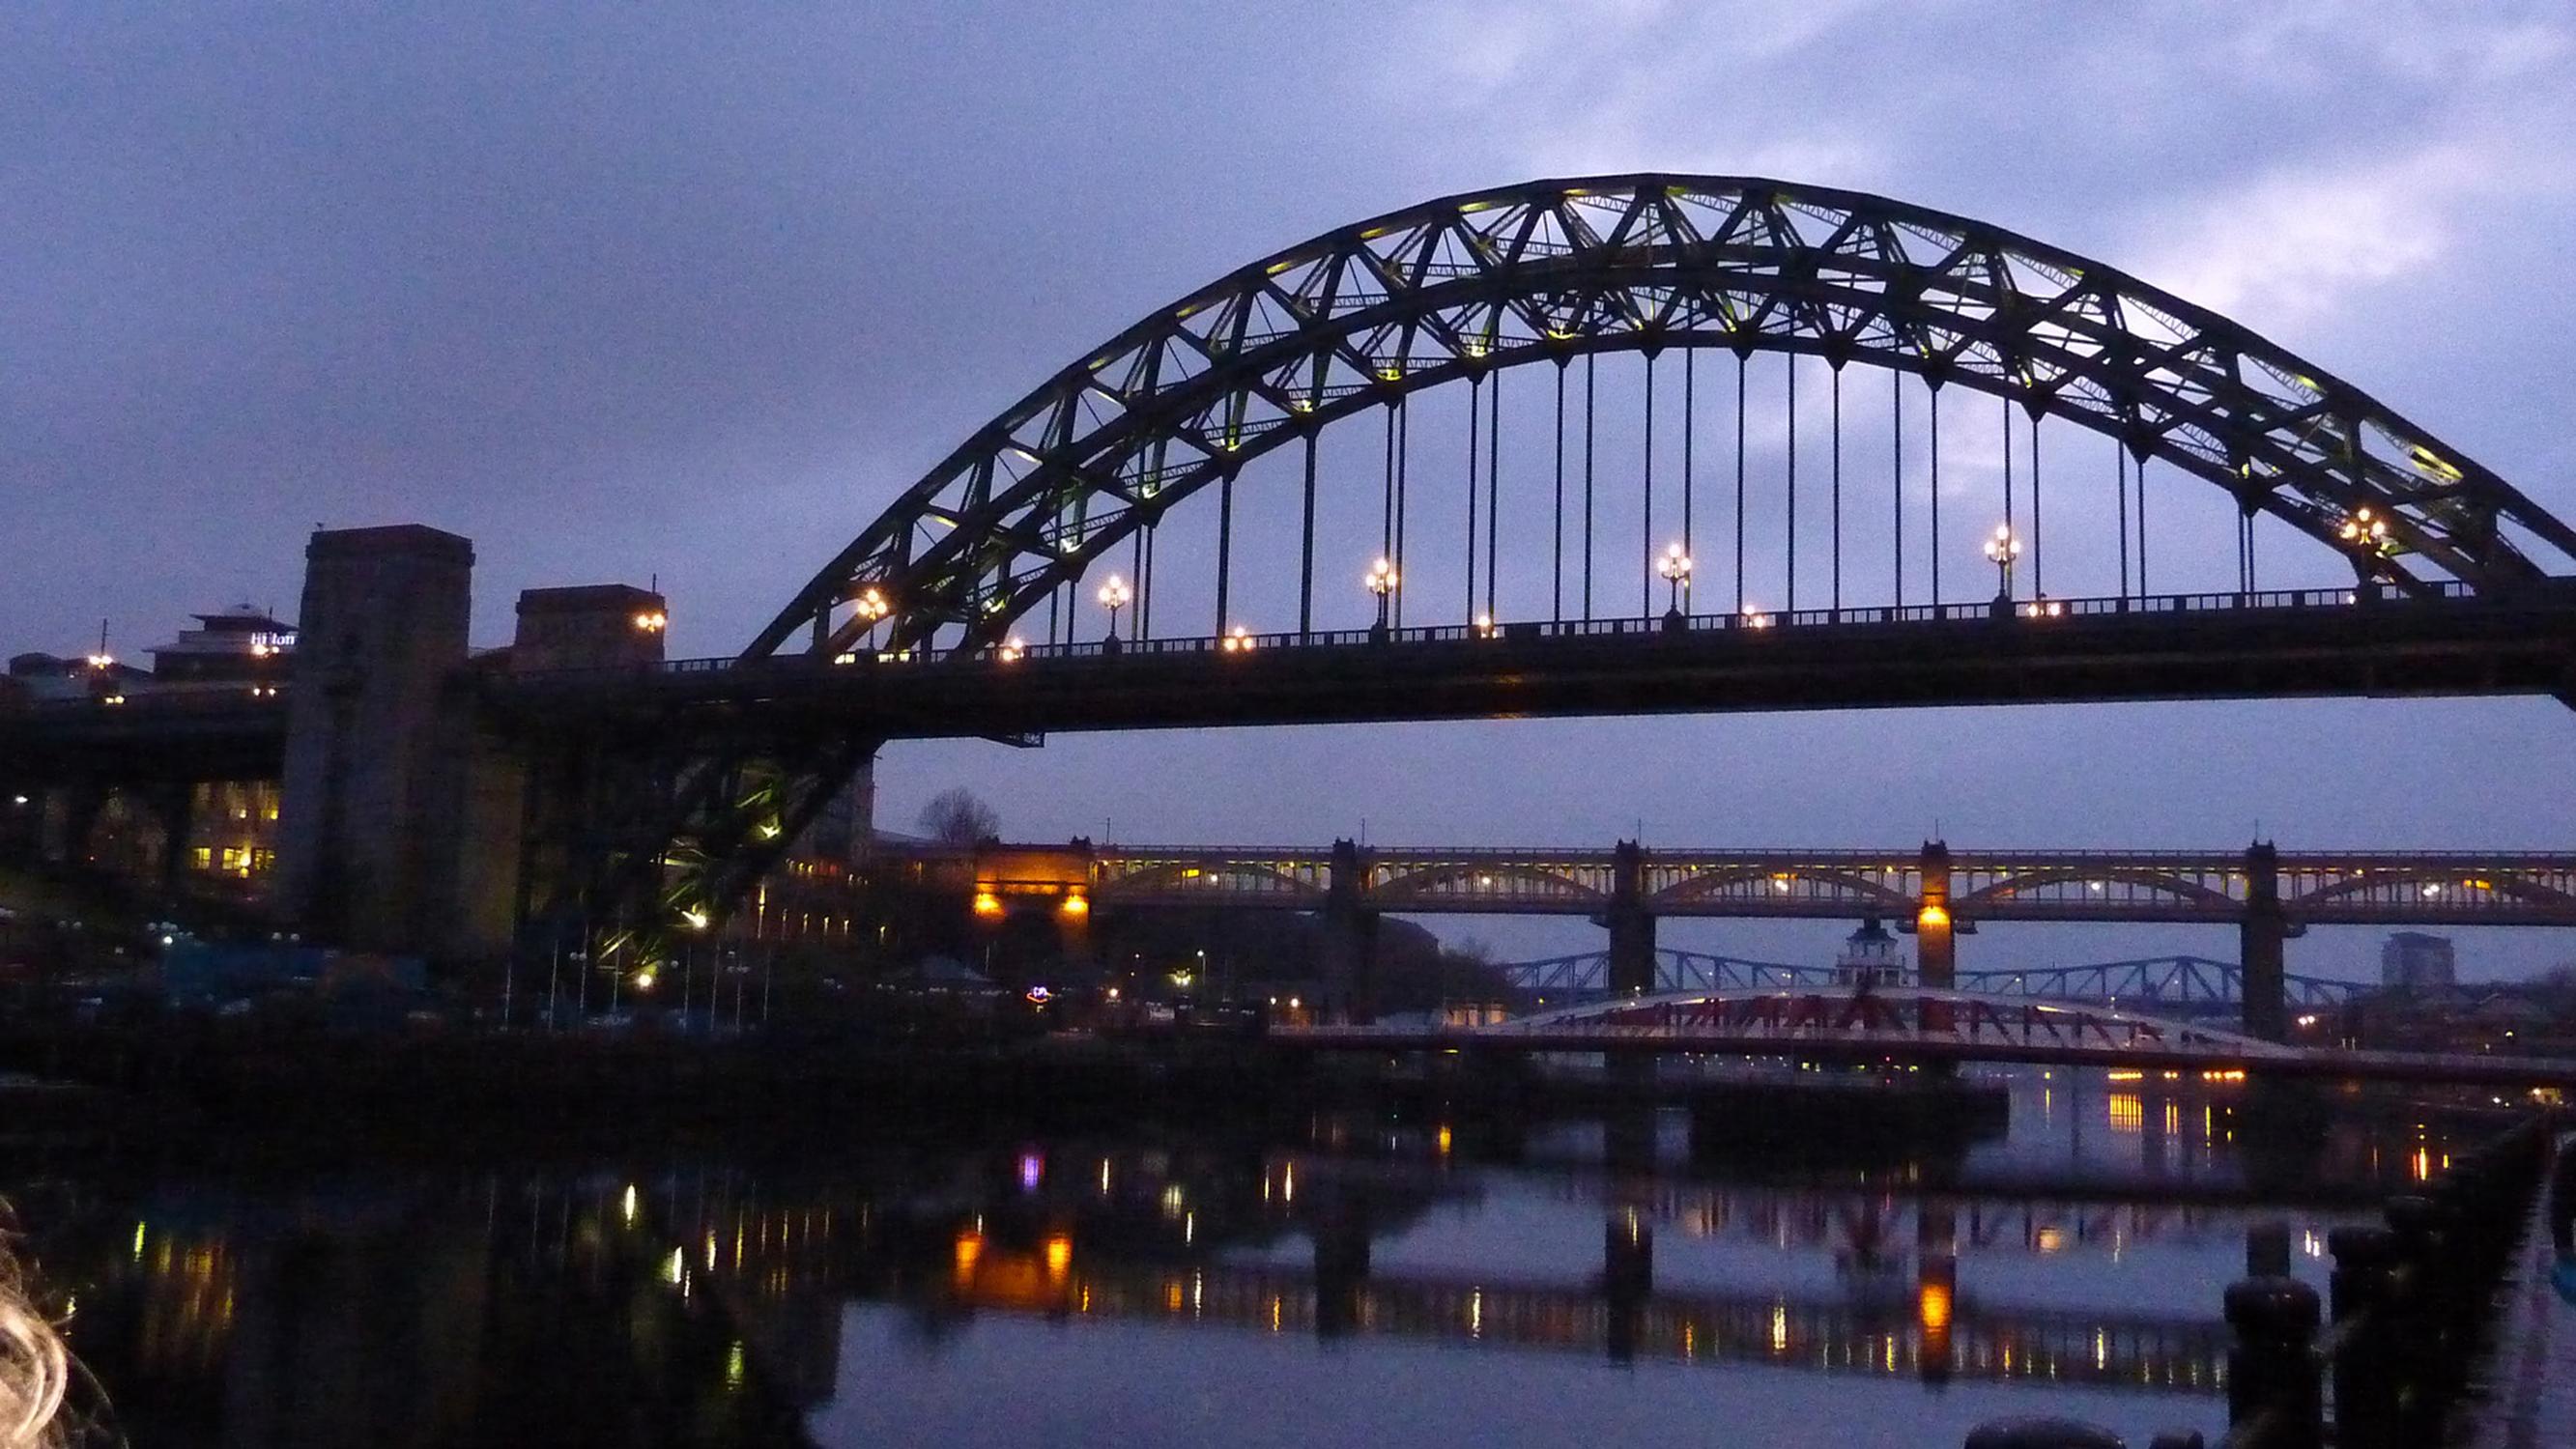 Councils are consulting on introducing tolls on the Tyne Bridge, saying this could be more equitable than a CAZ